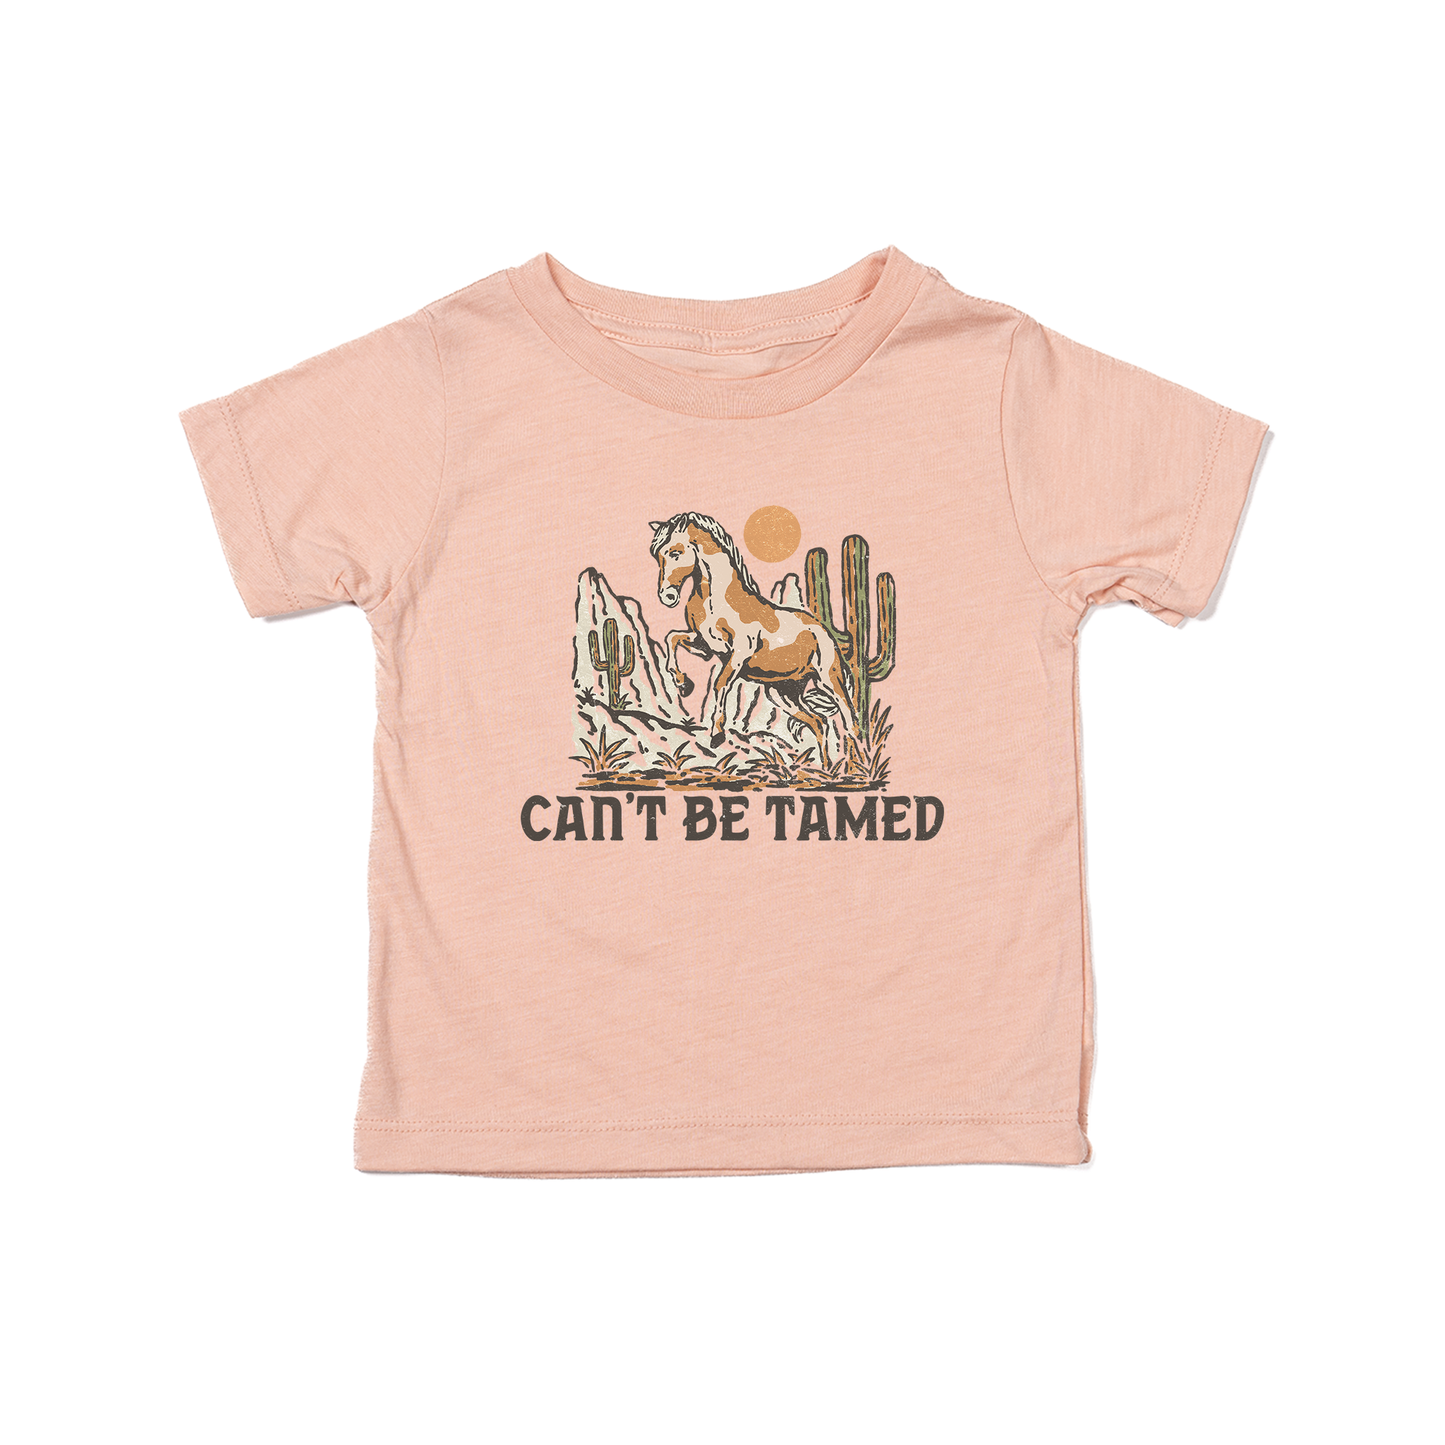 Can't Be Tamed - Kids Tee (Peach)